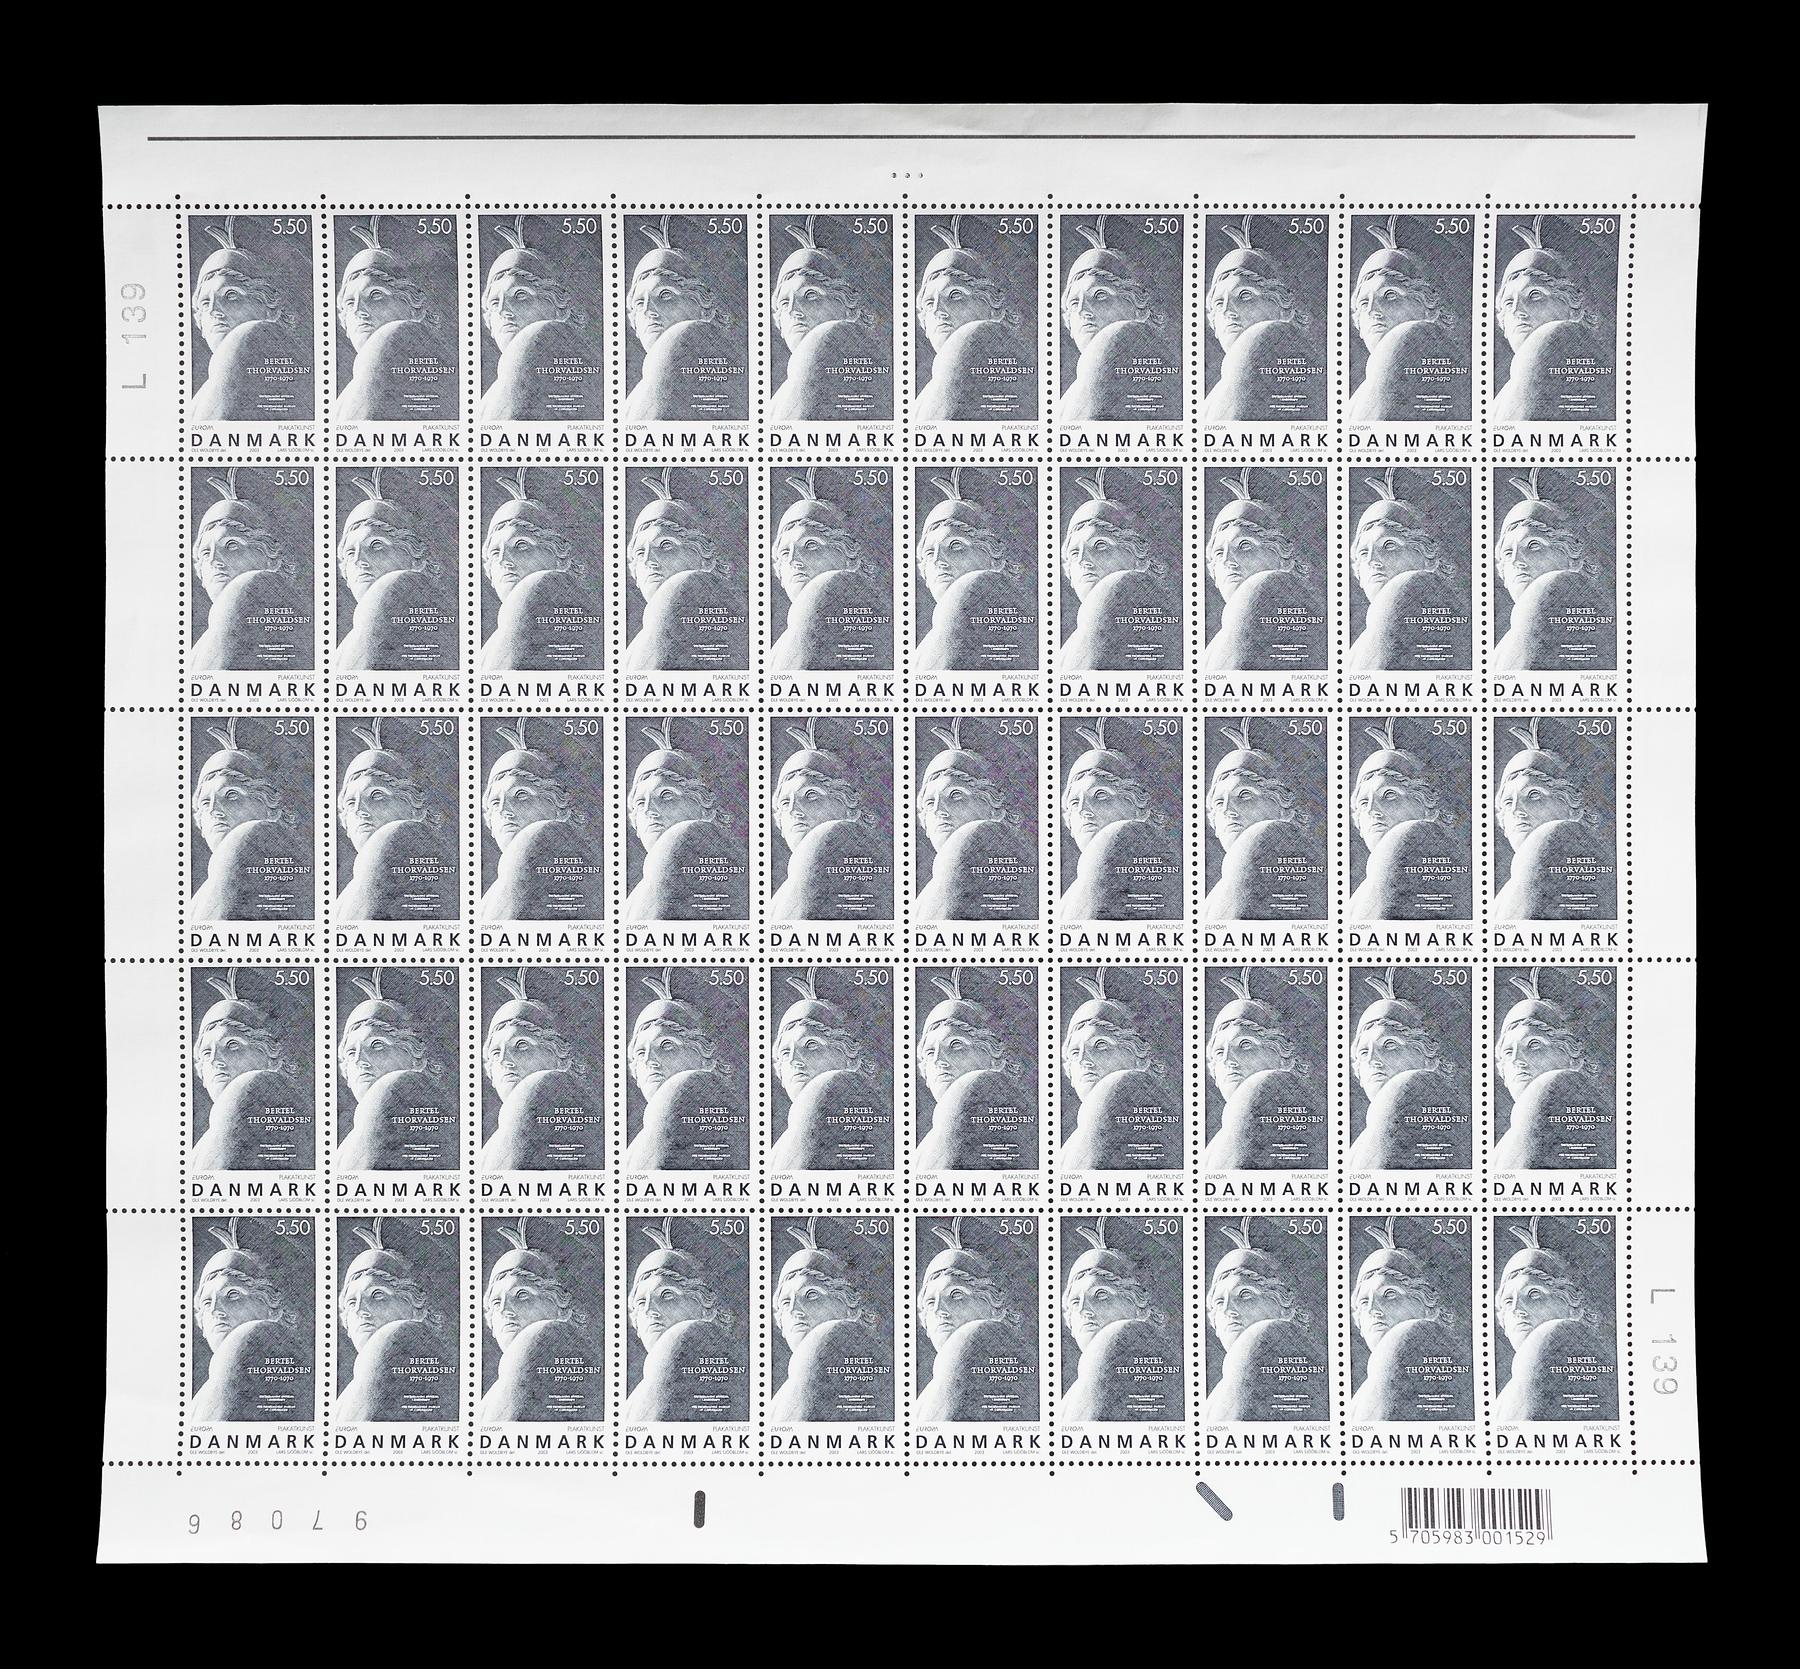 Sheet of 50 Danish stamps with Thorvaldsen's Jason with the golden skin, E2337